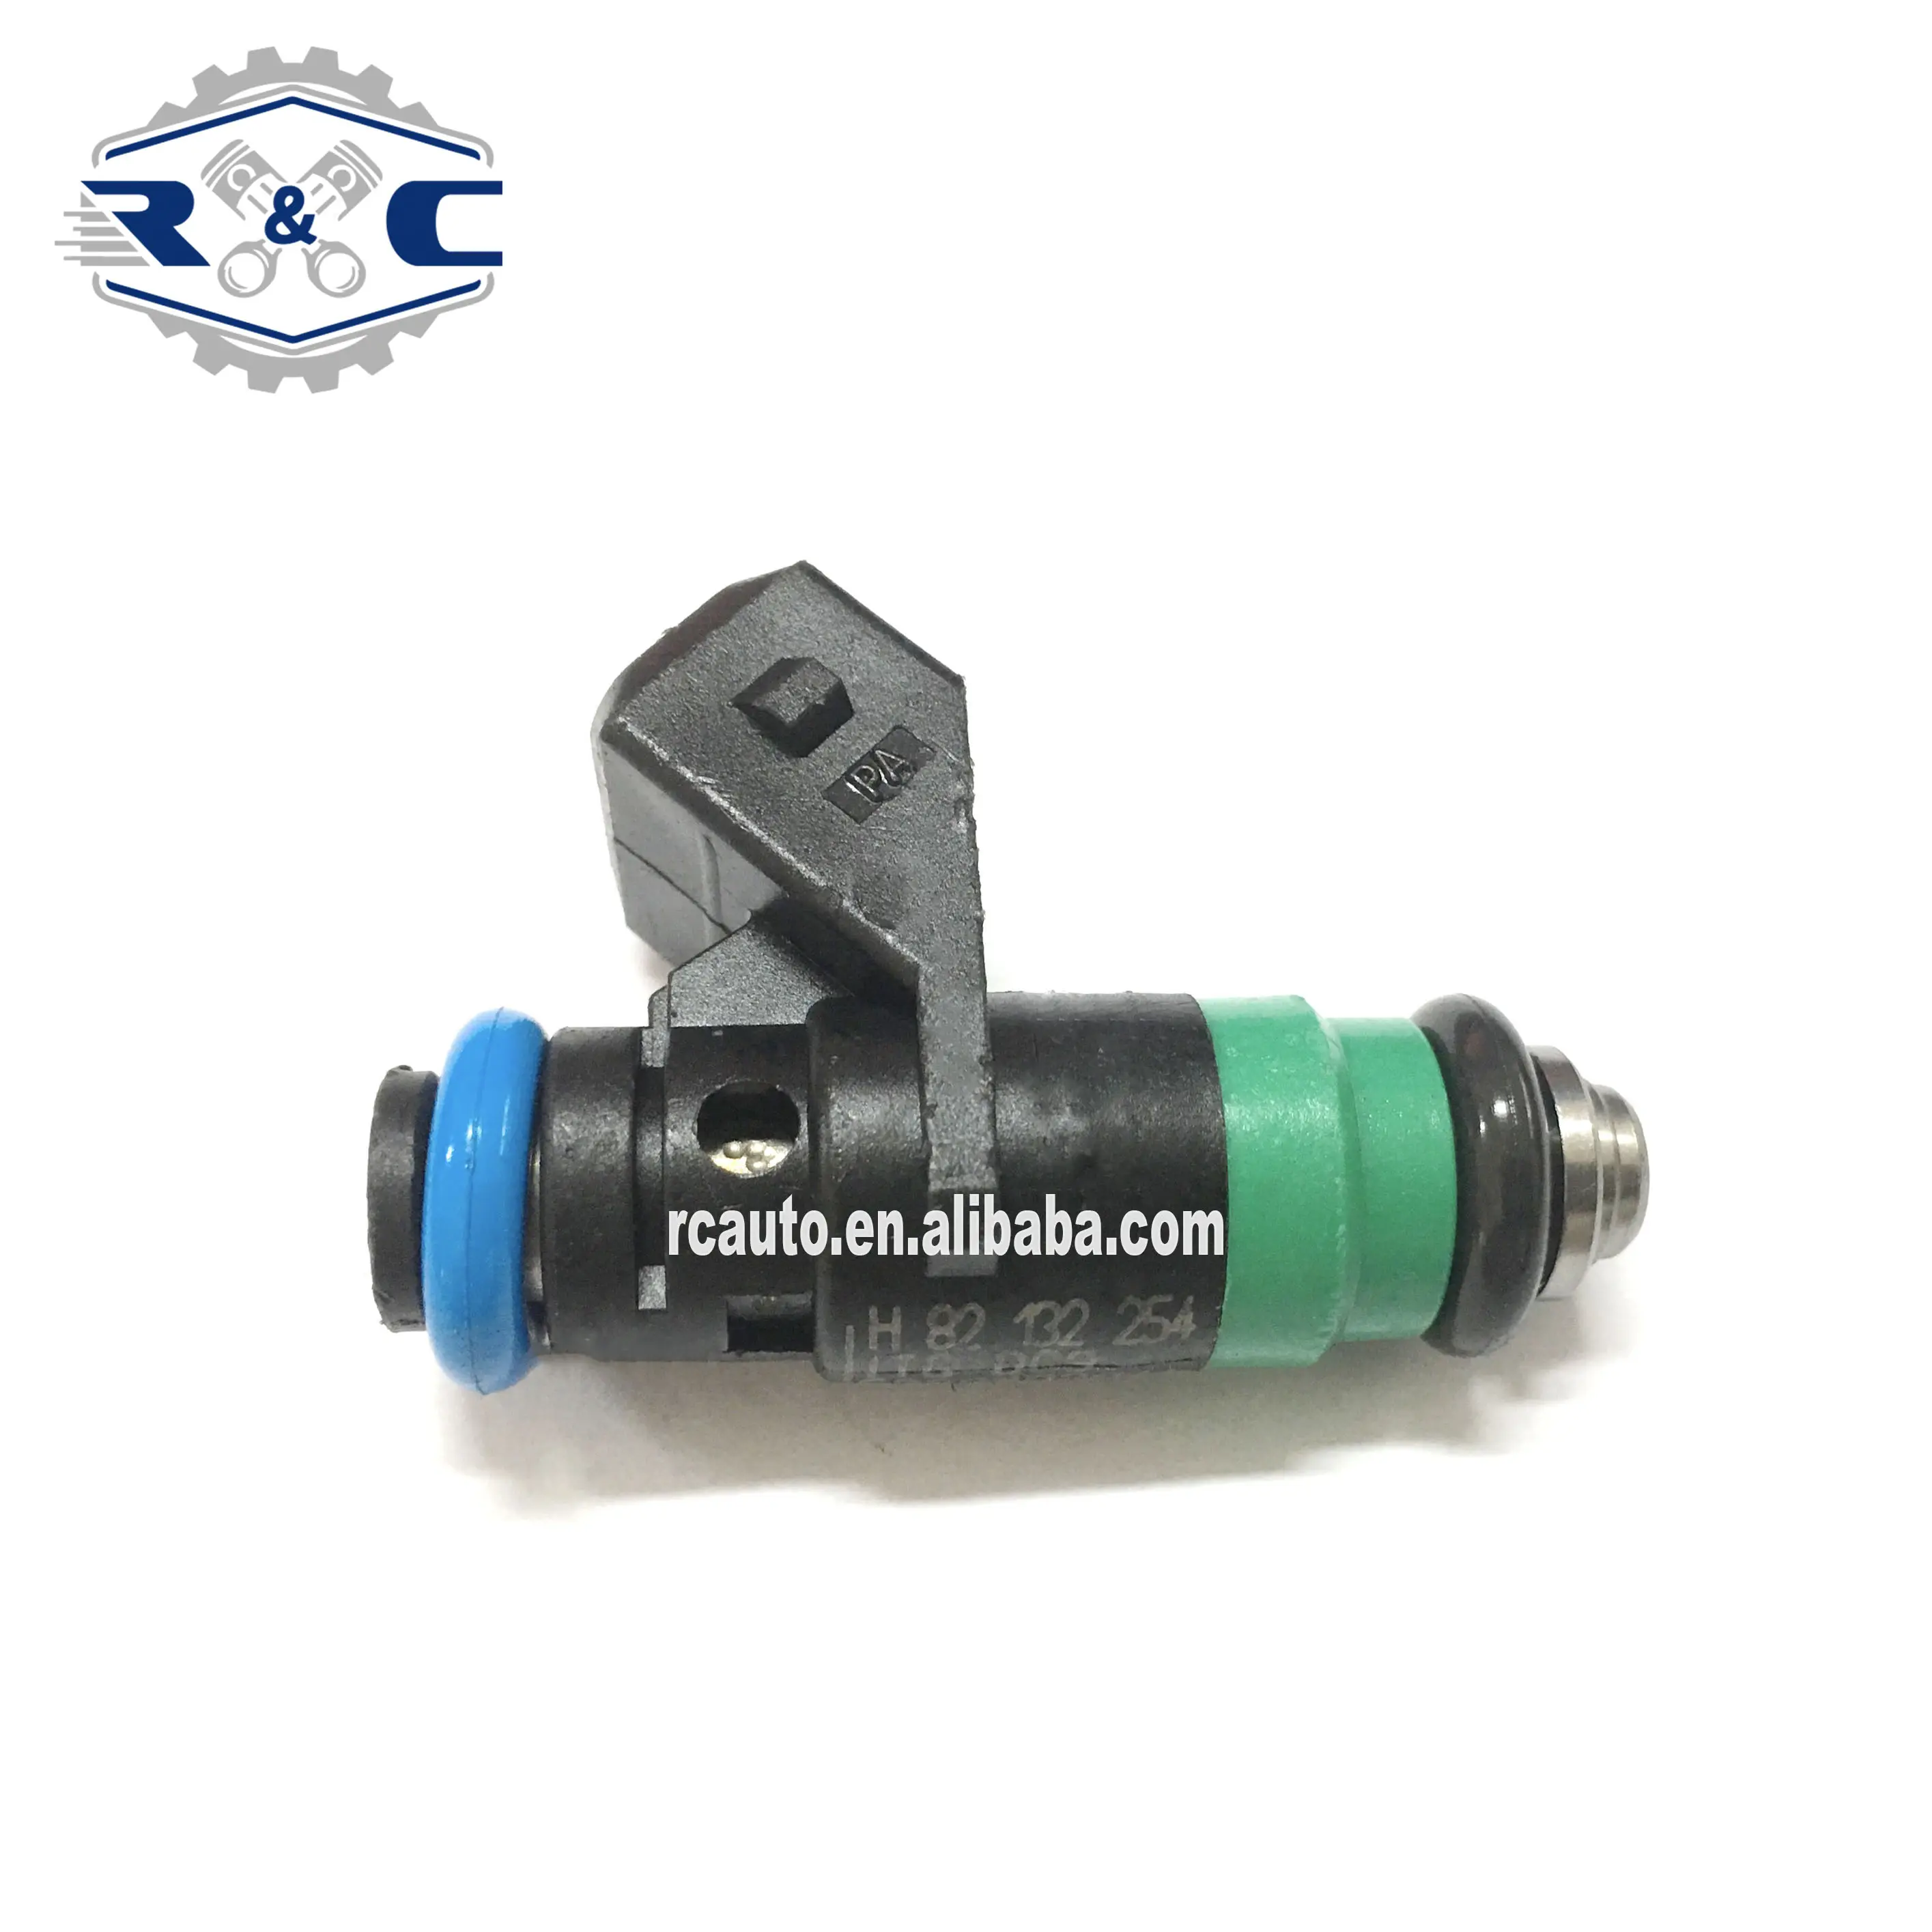 R&C High Quality Injection H82132254 Nozzle Auto Valve For Renault Logan 100% Professional Tested Gasoline Fuel Injector